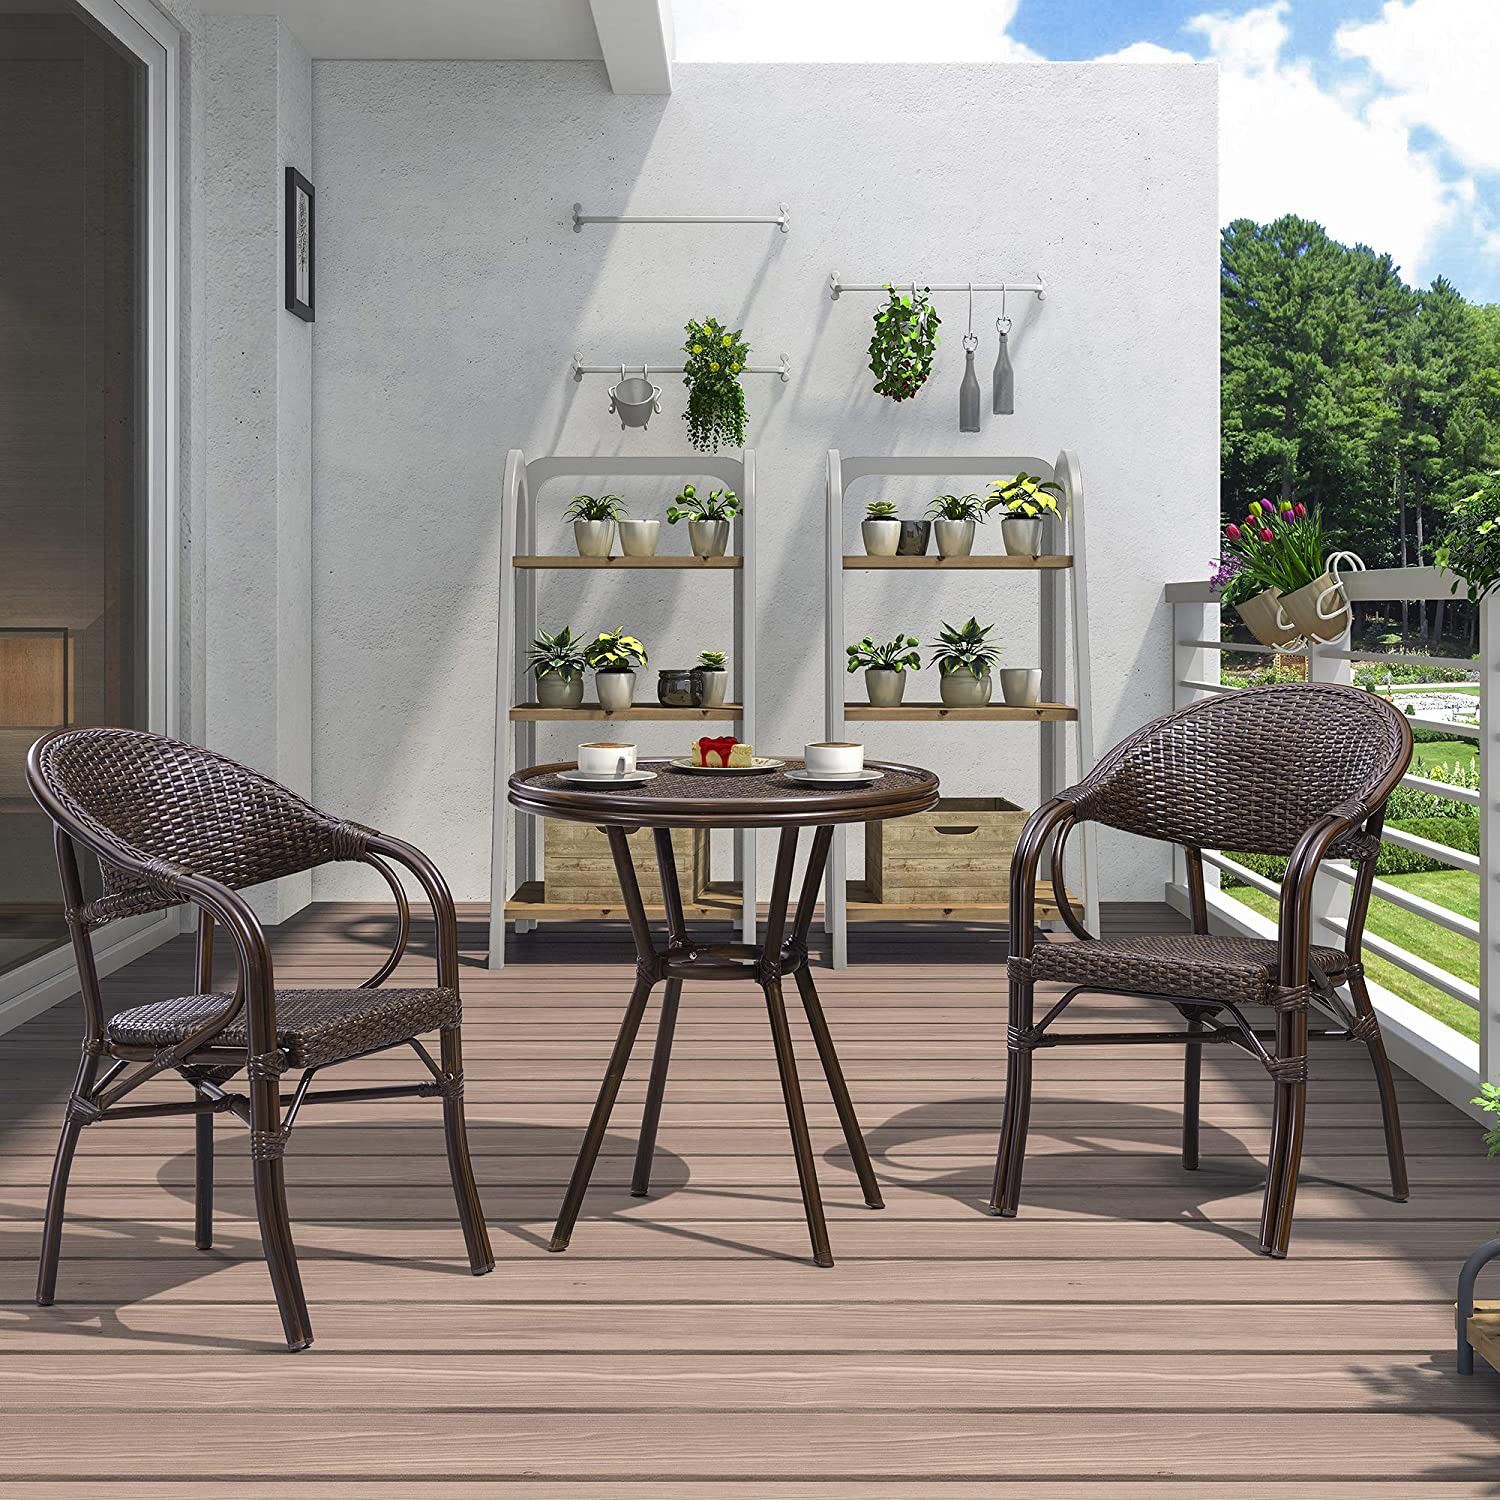 Set of 3 - Industrial Bistro Set, Armed Bistro Chair and Glass Top Table for Patio, Brown